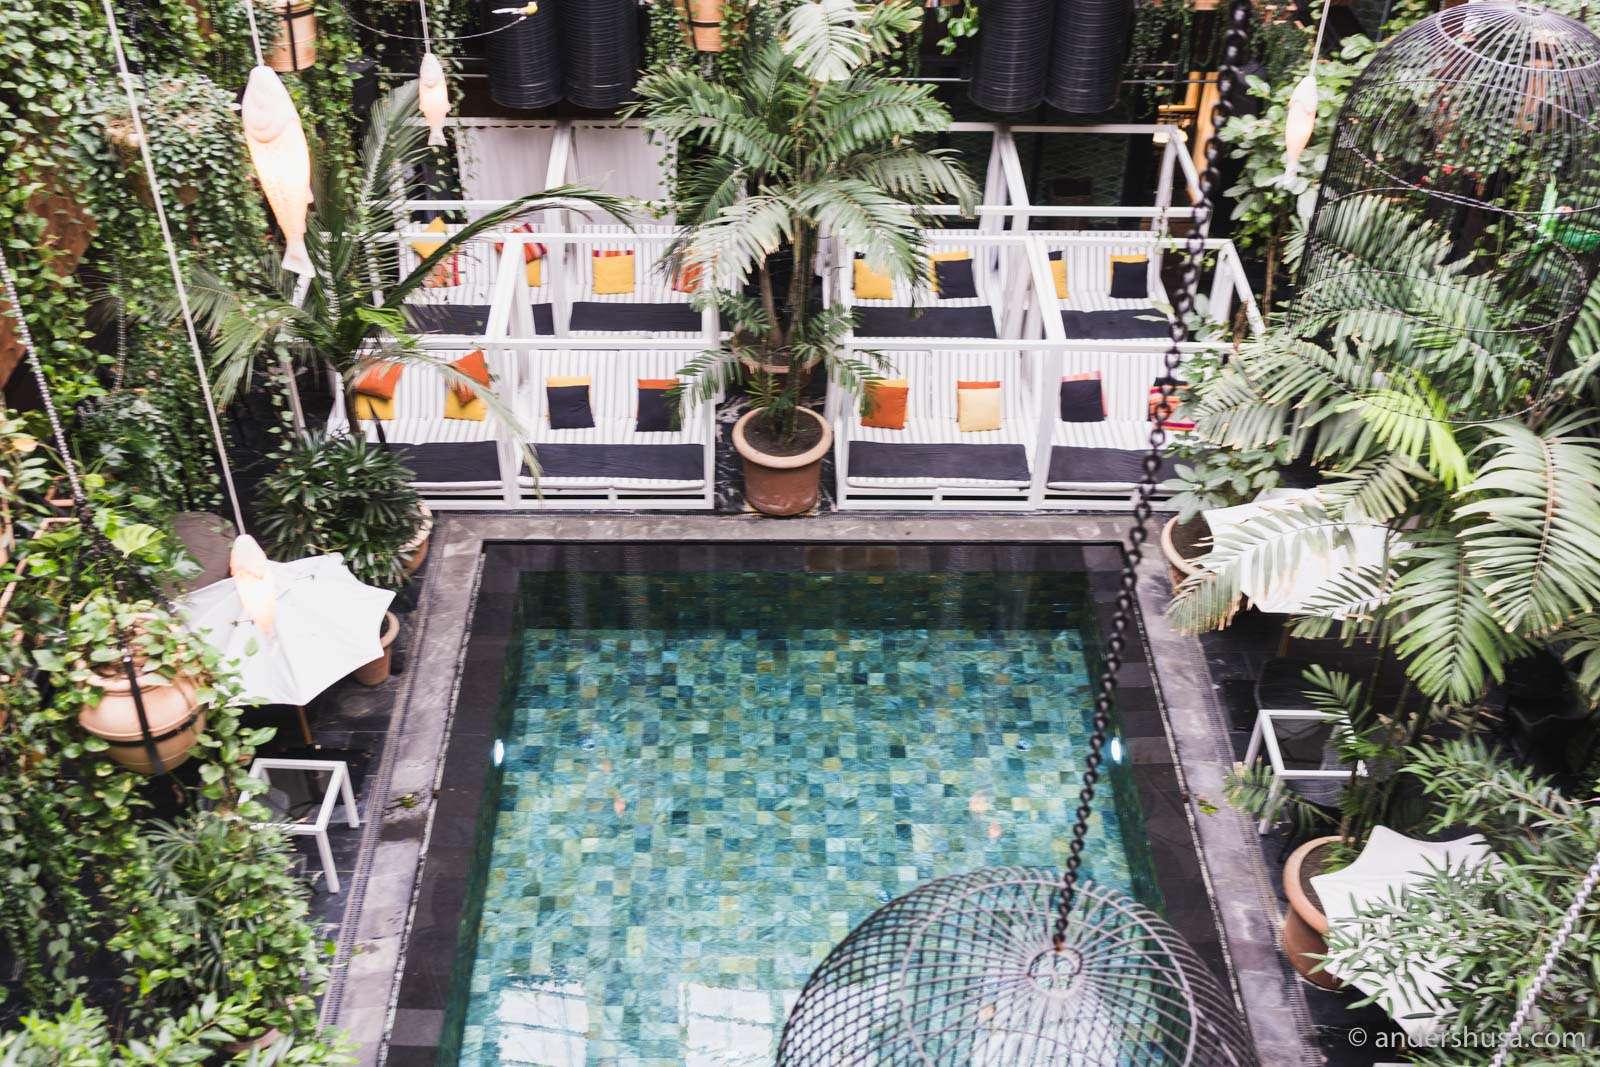 Manon Les Suites | A Tropical Spa Hotel in the Middle of Copenhagen